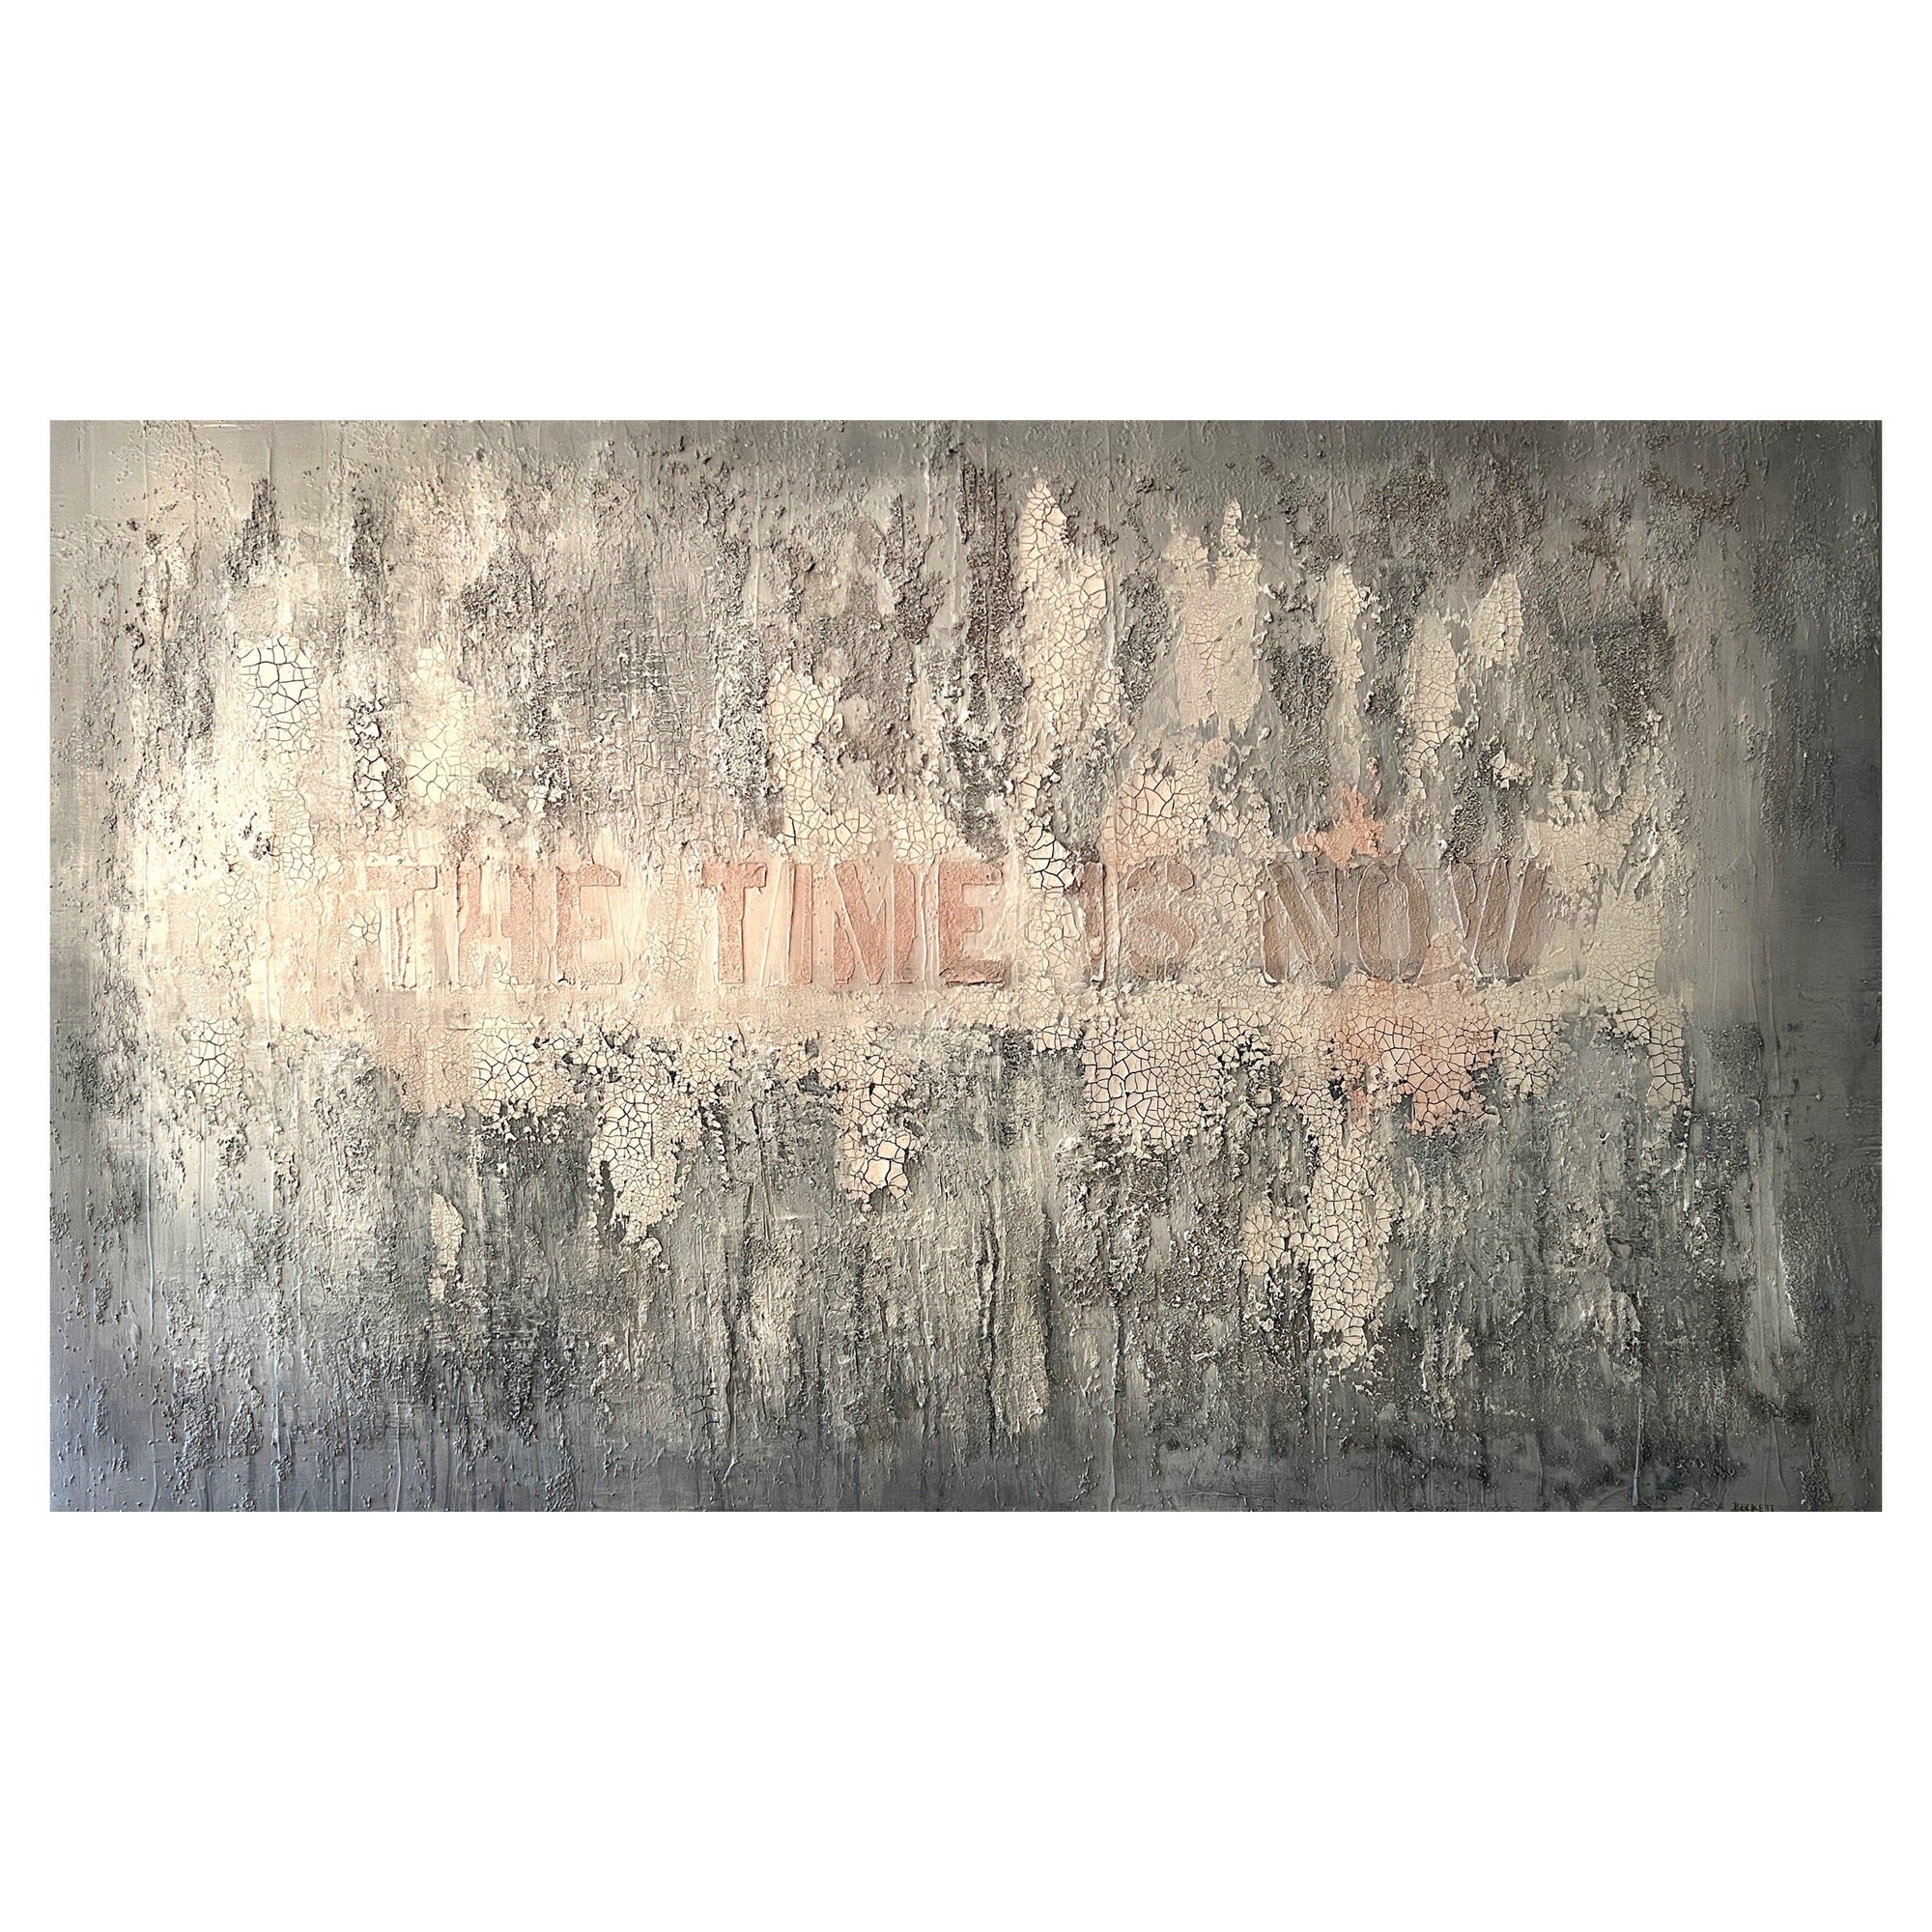 The Time Is Now. Limited Edition Prints